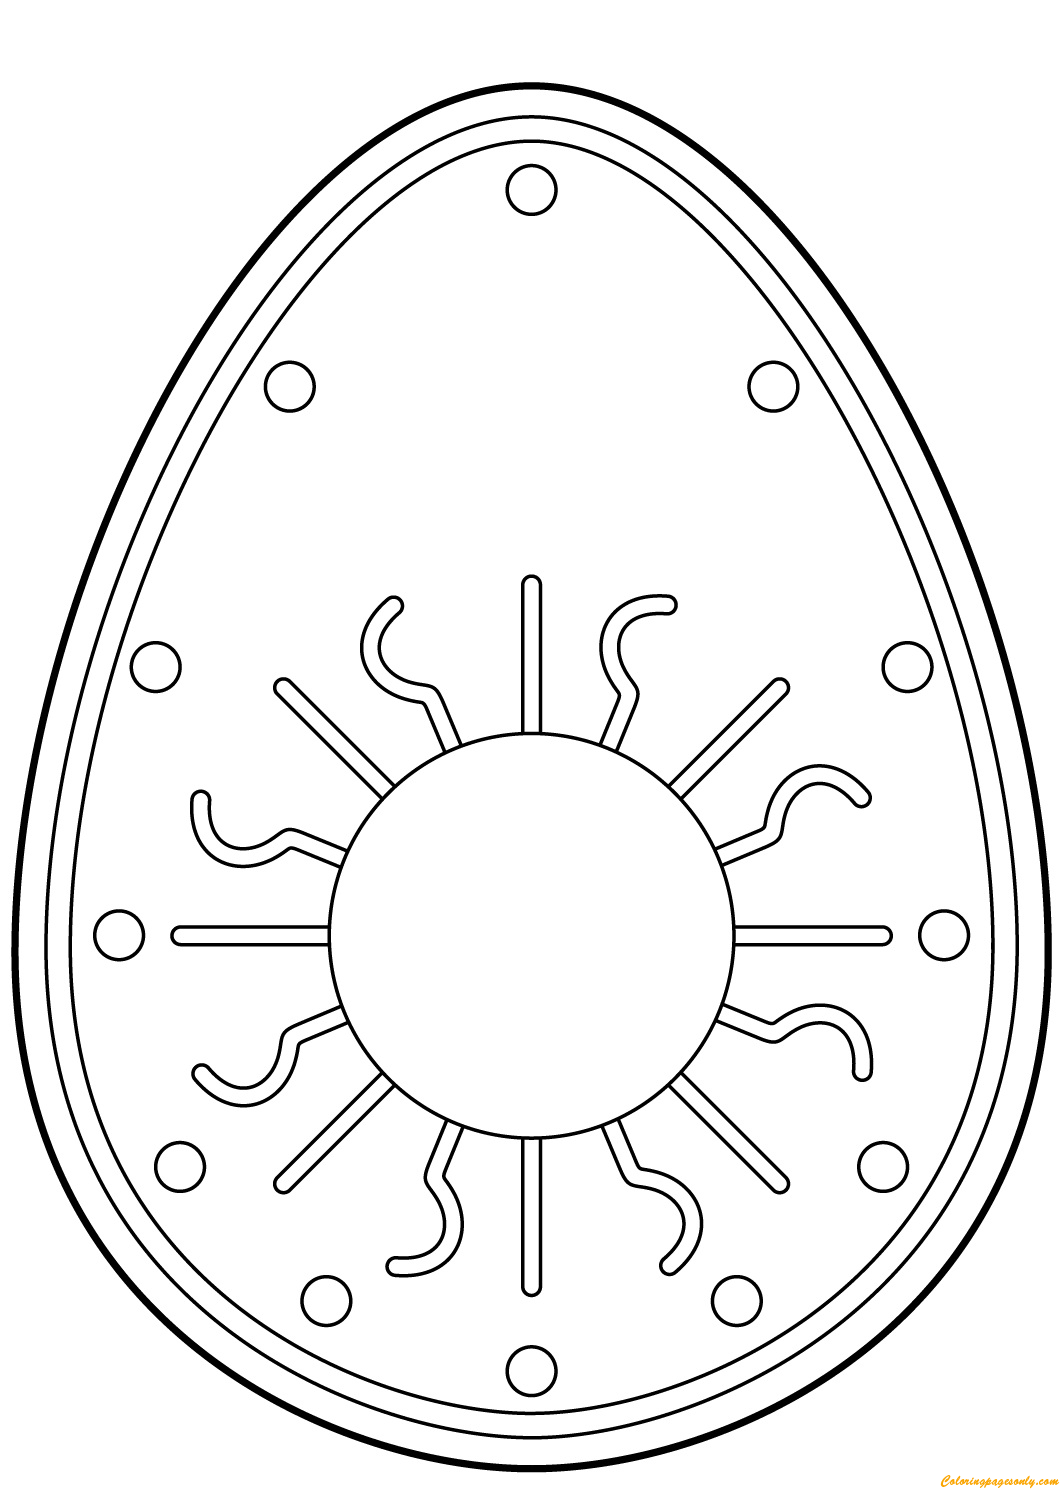 Easter Egg with Sun Pattern Coloring Page